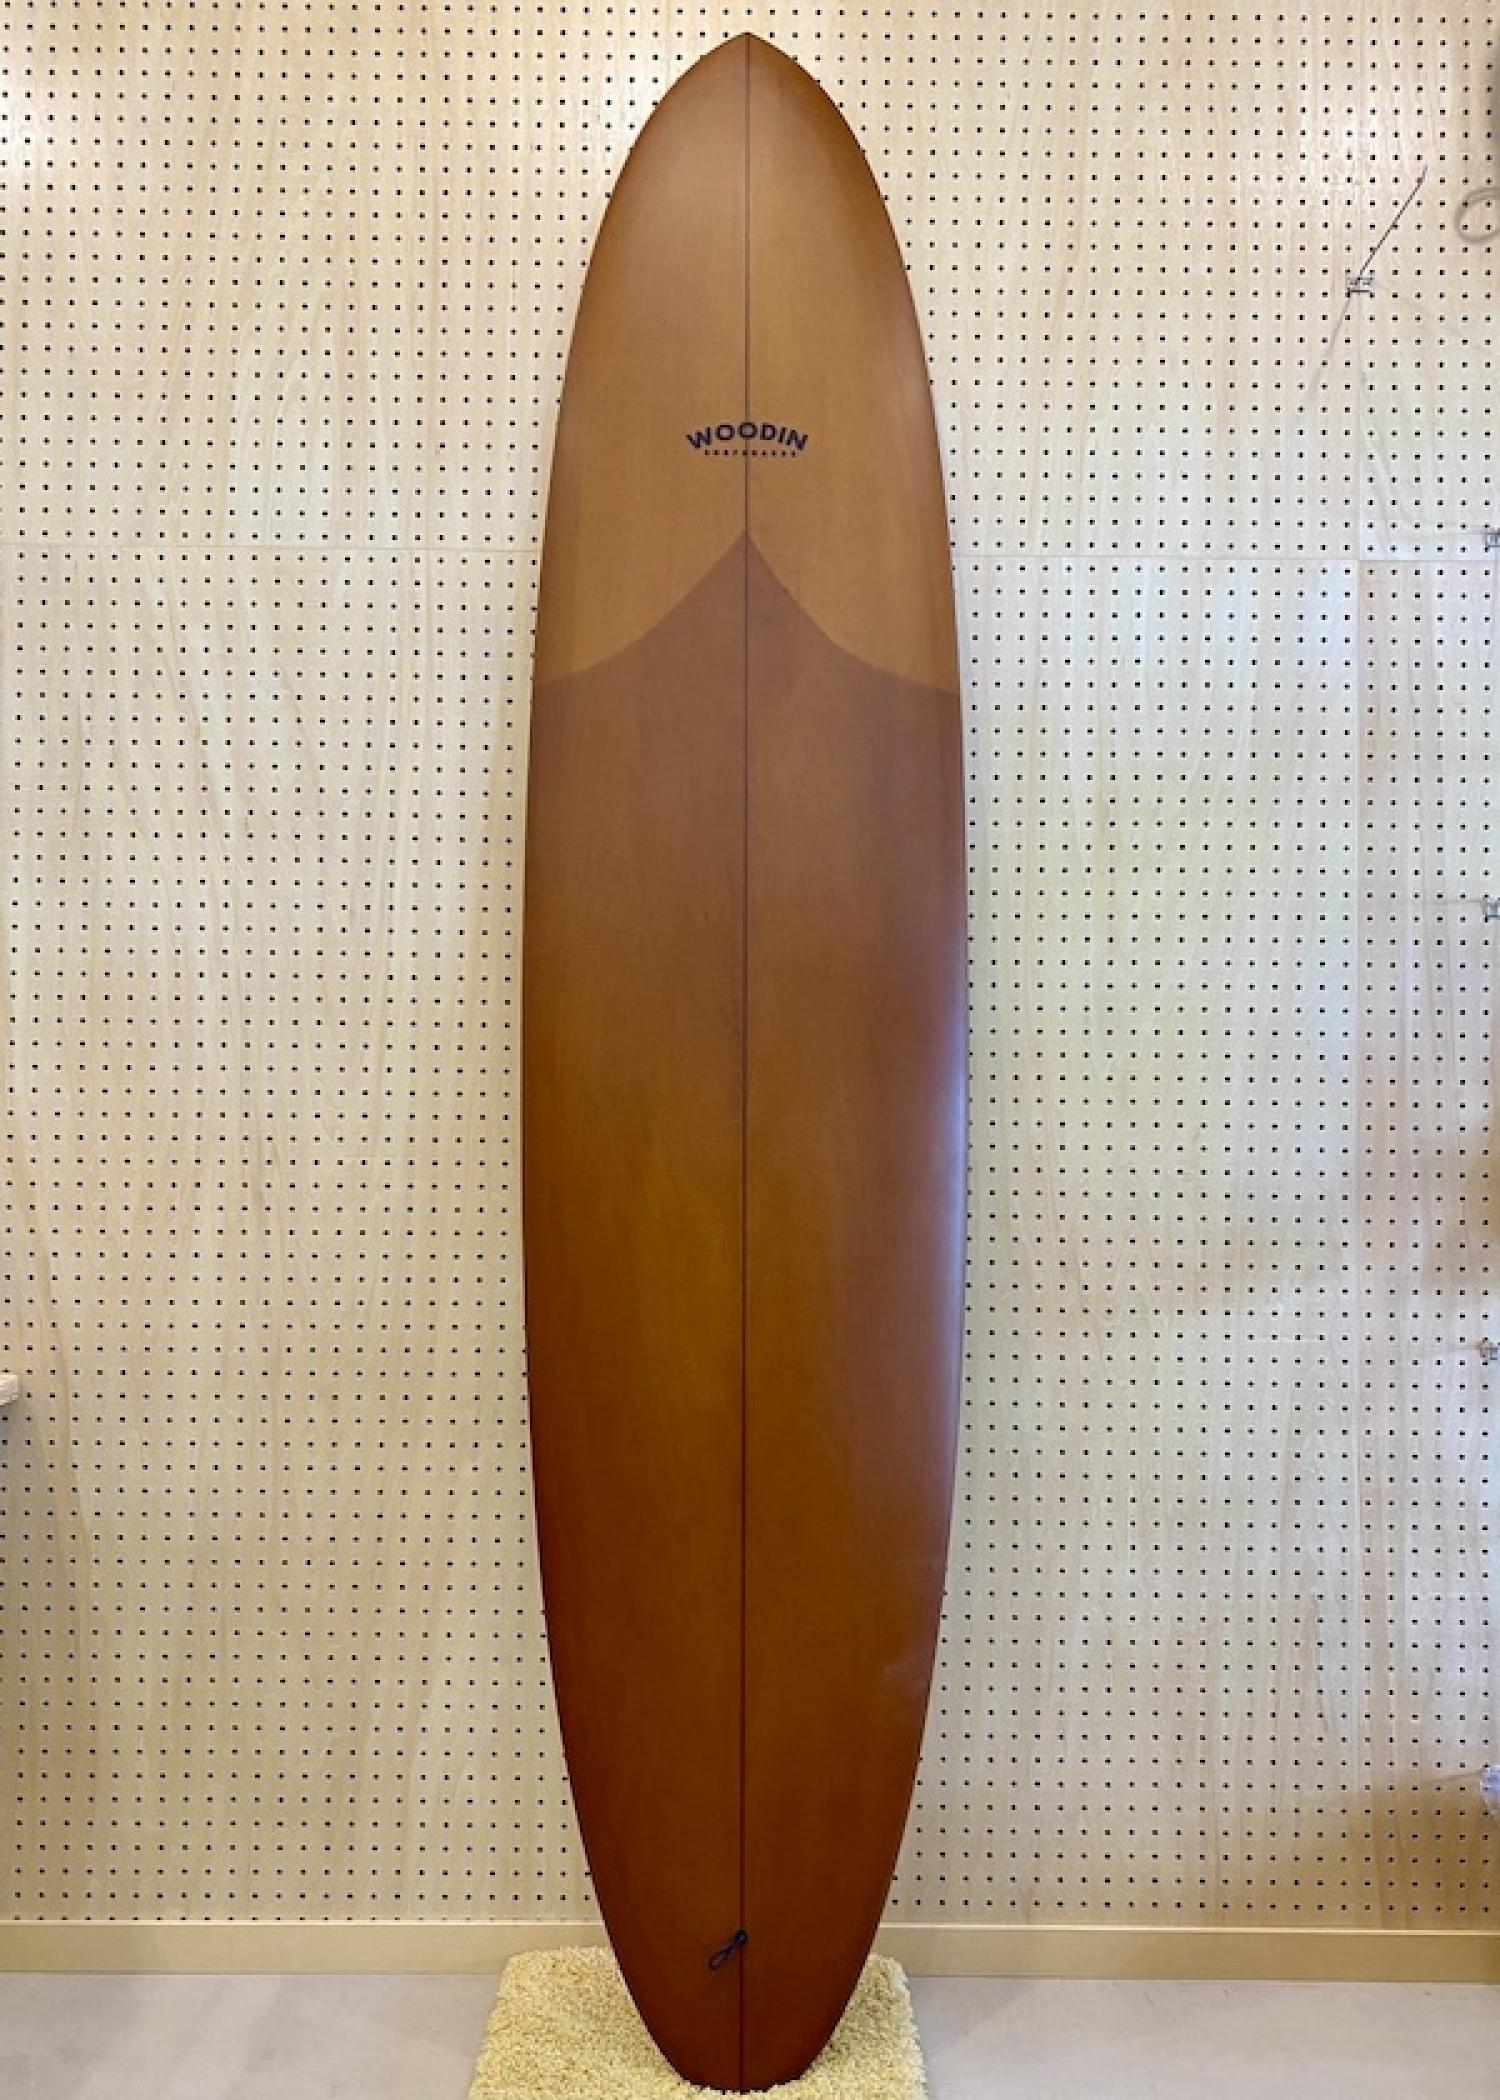 BOARDS|Okinawa surf shop YES SURF